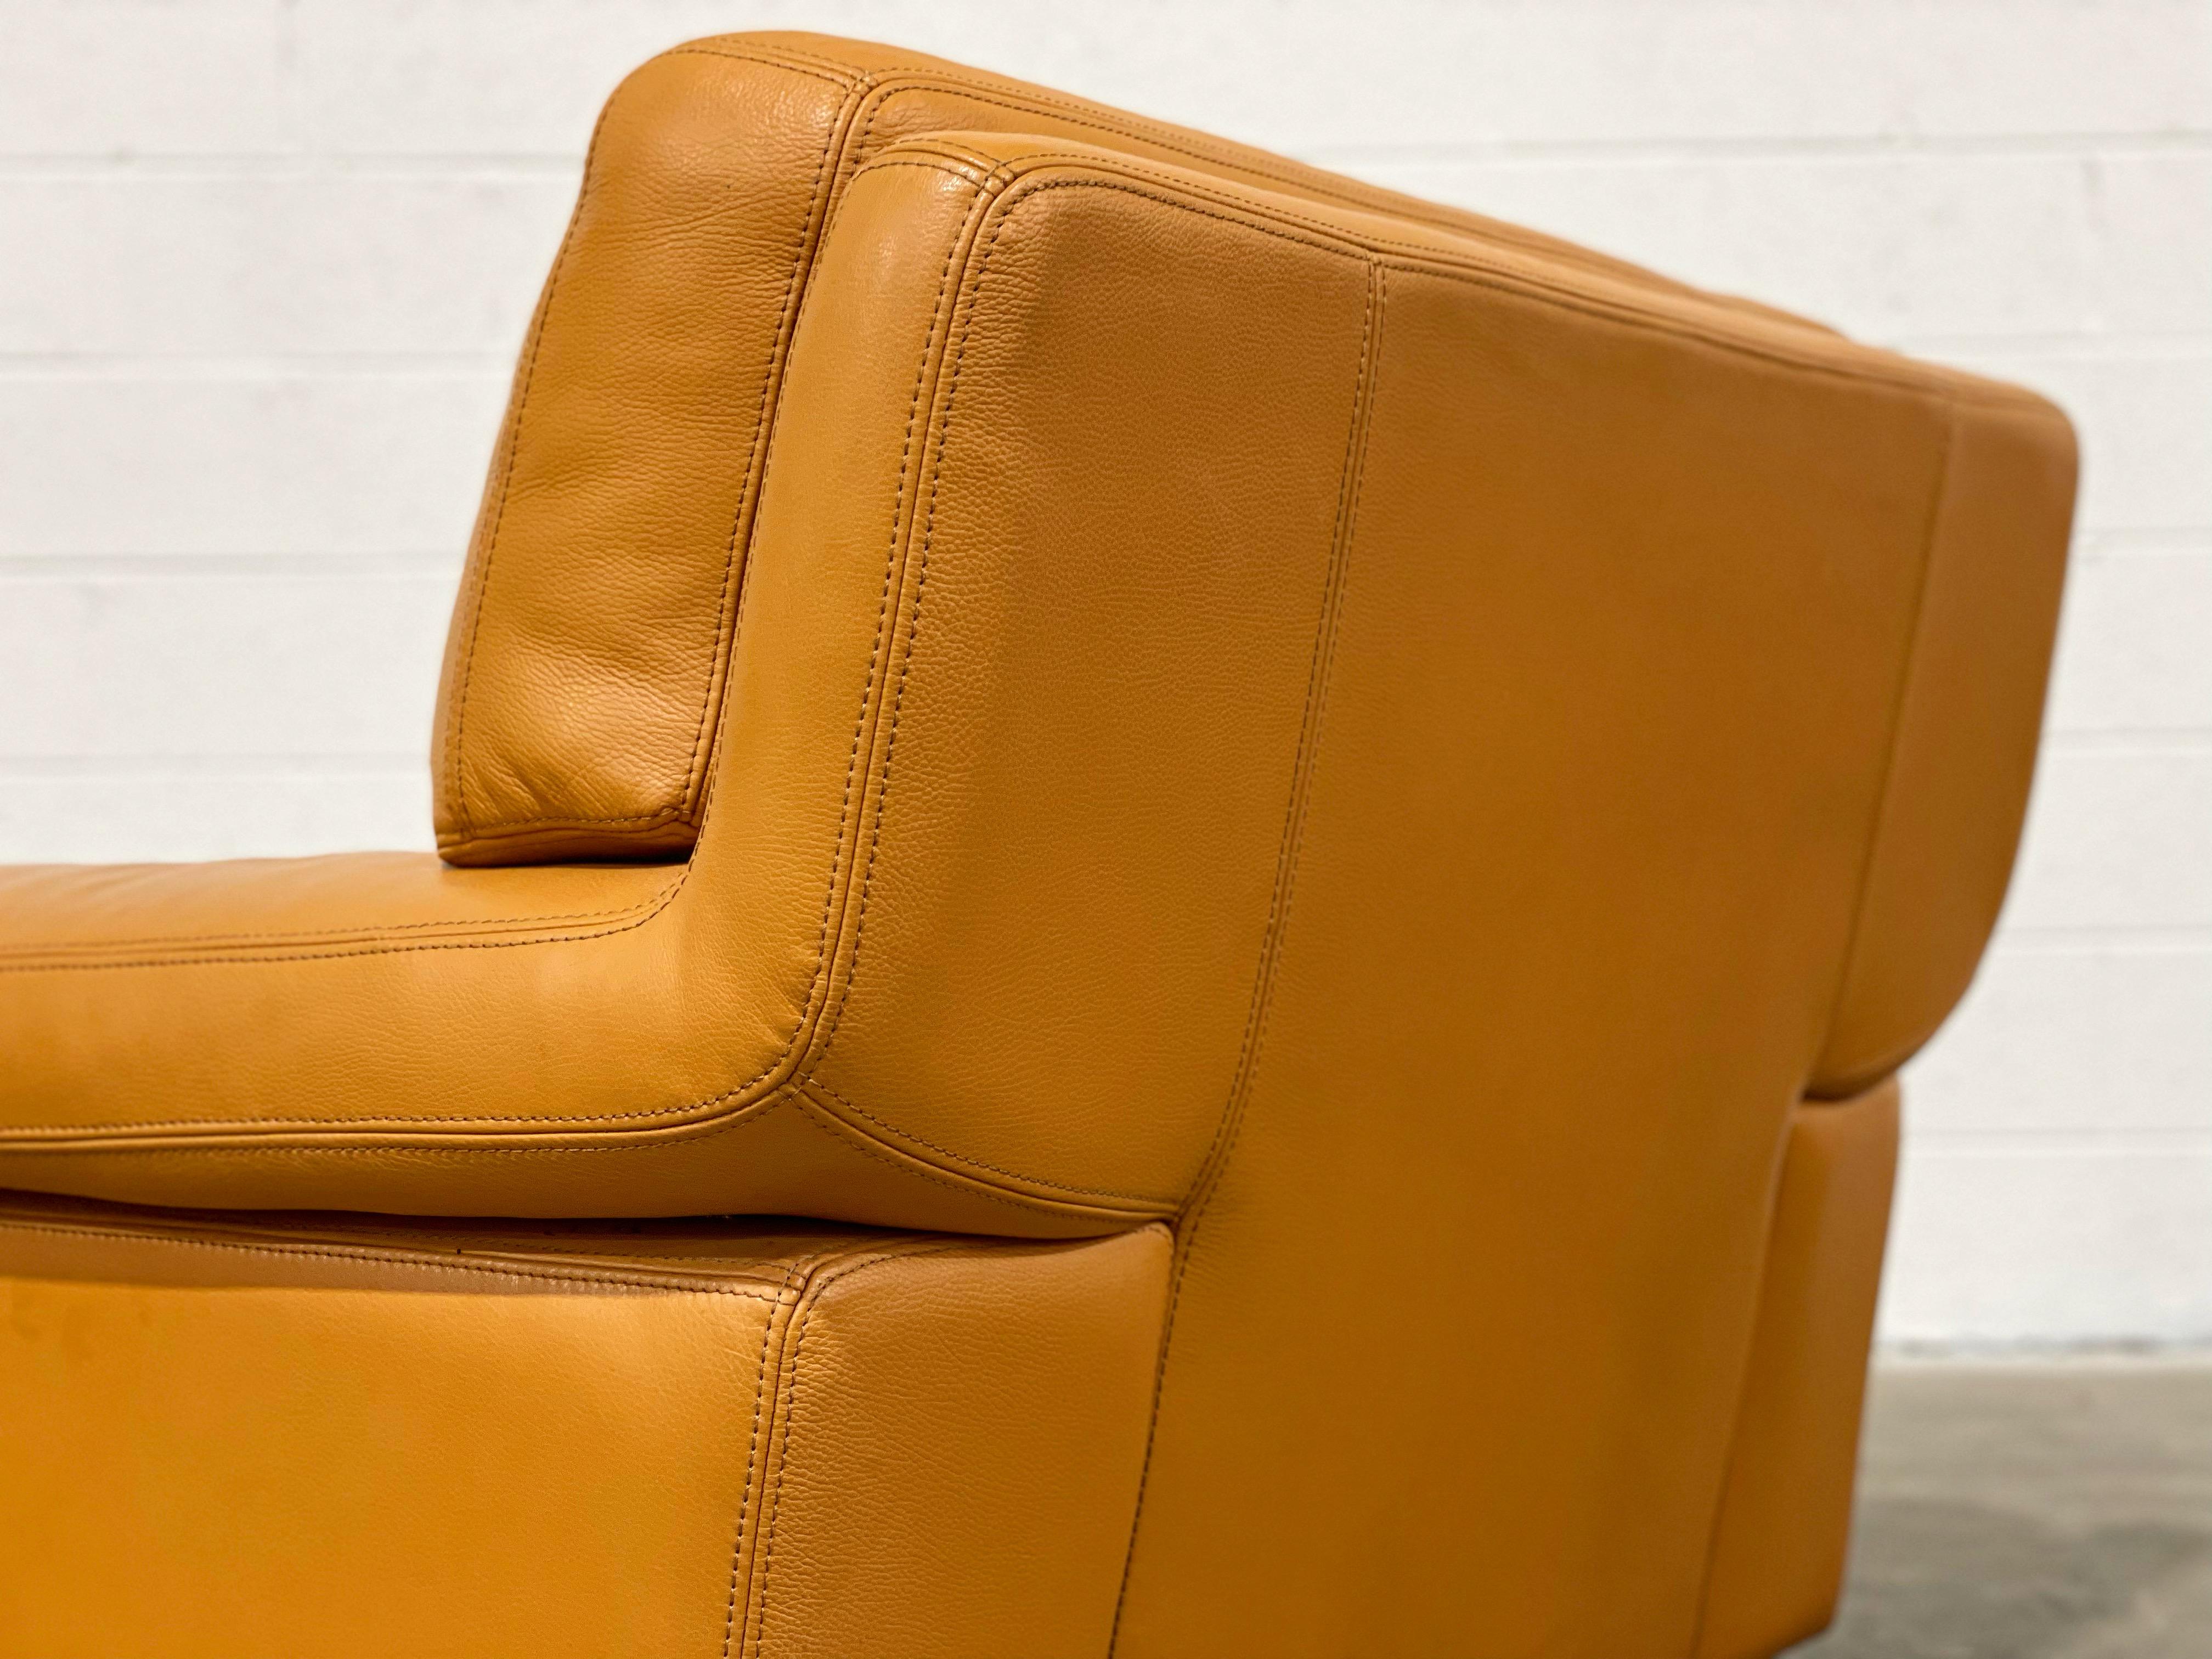 Roche Bobois Vintage Post Modern Leather Club Chair, Butterscotch Tone Leather 1